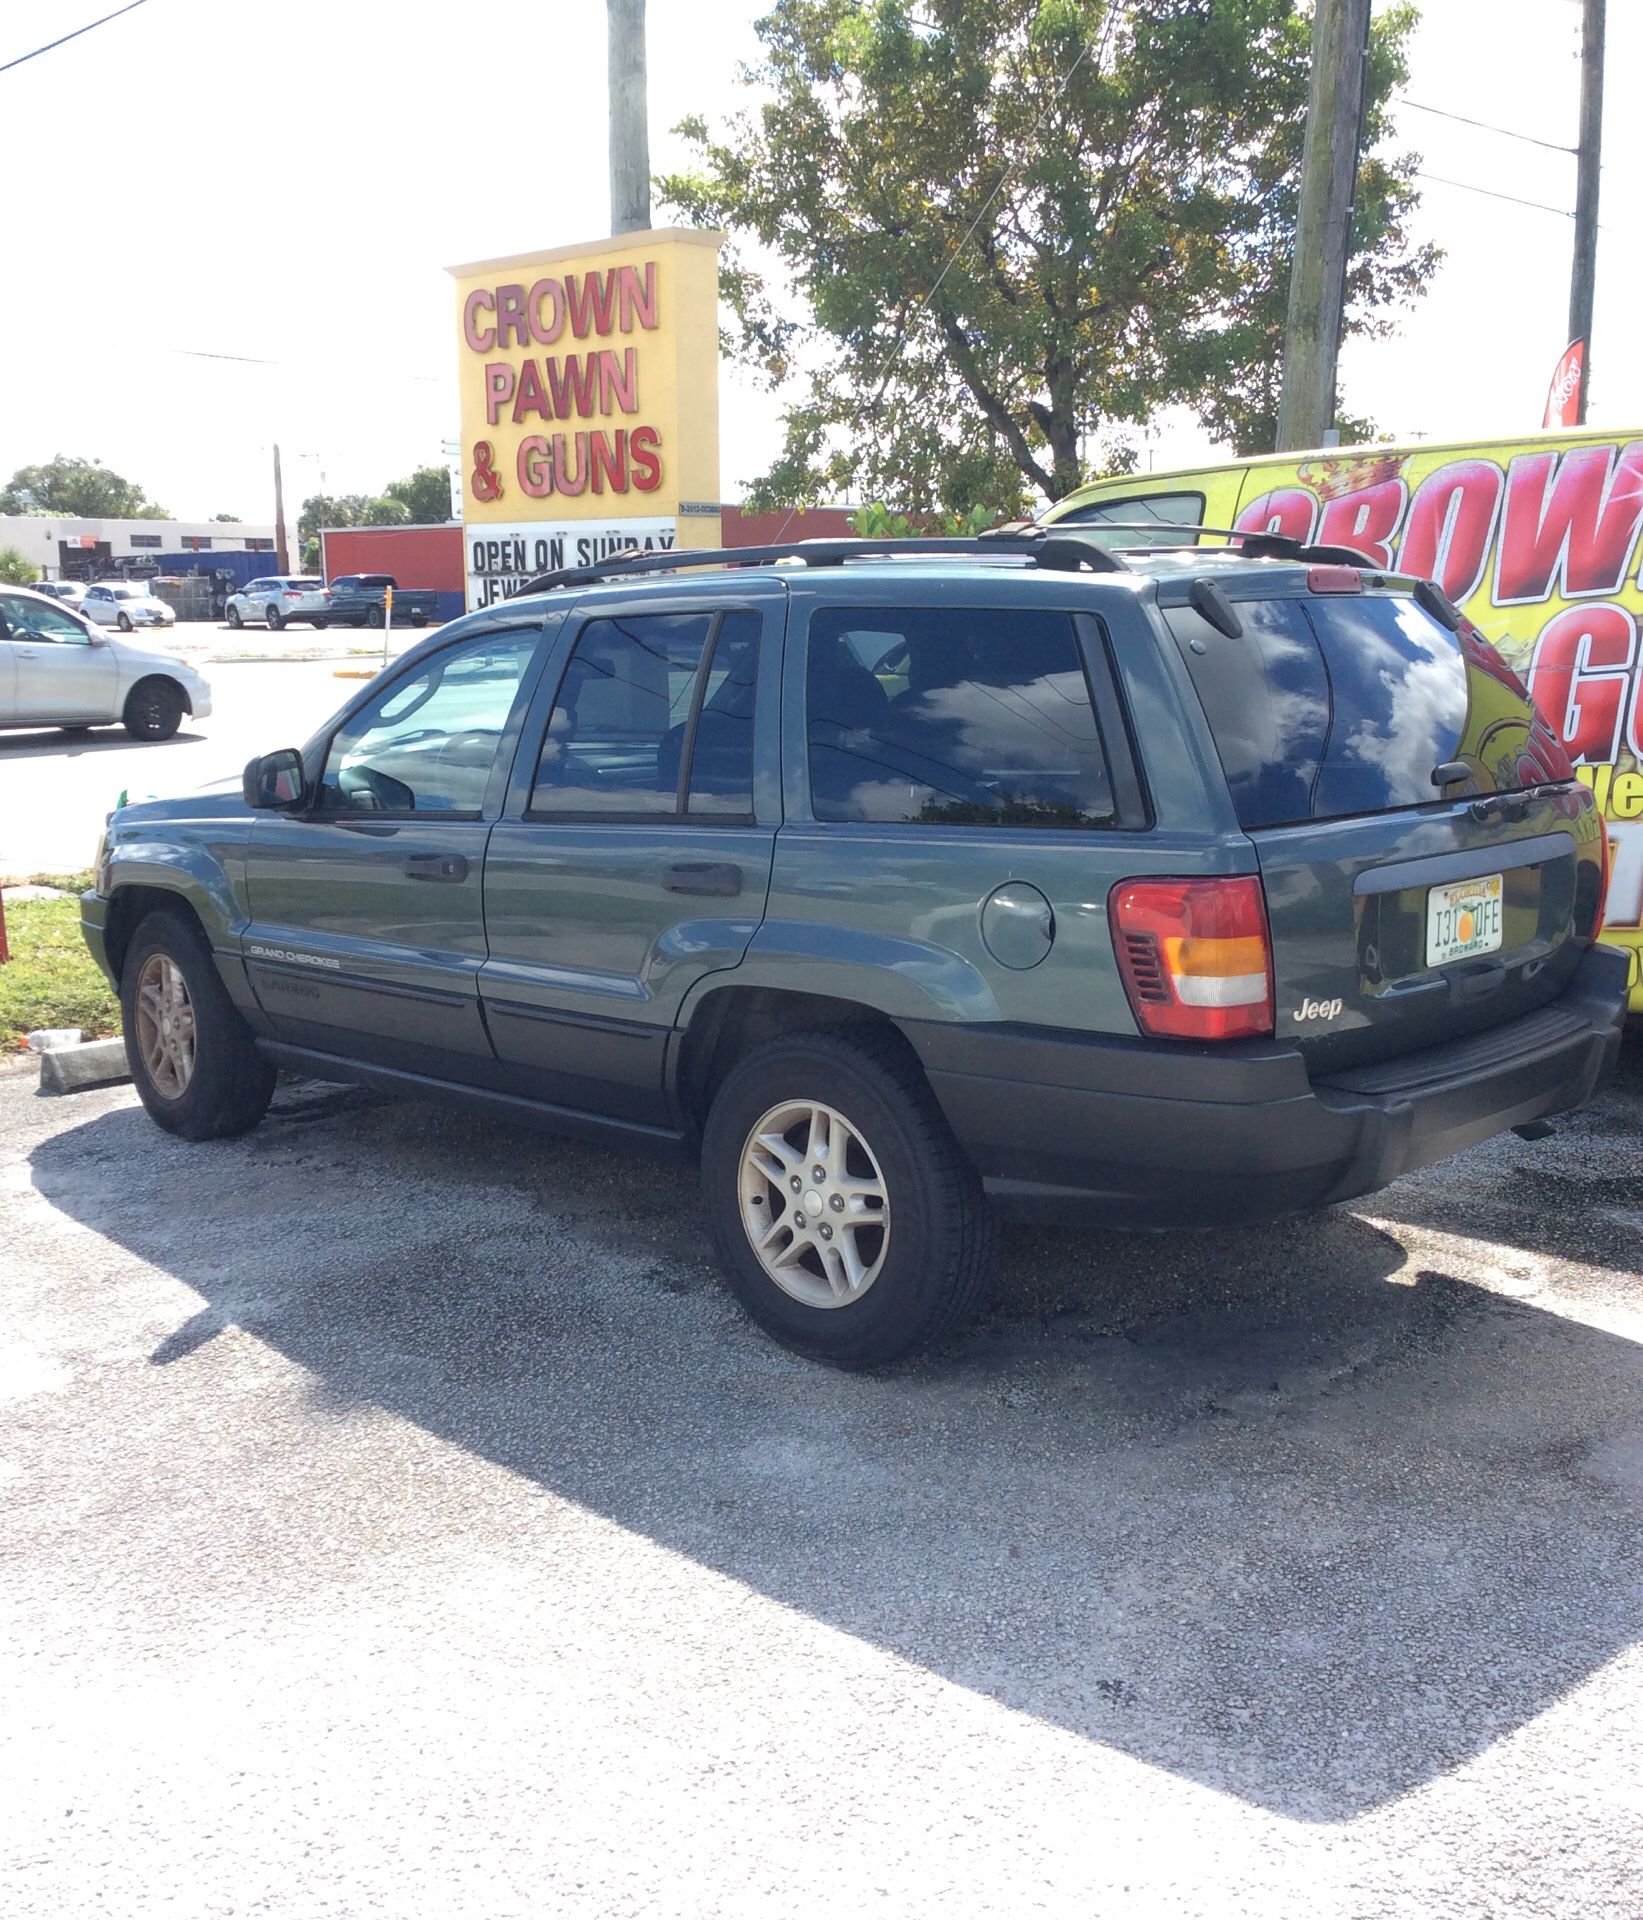 2003 Jeep Grand Cherokee Laredo dark green automatic needs fuel rail or for parts::::CHEAP! With title